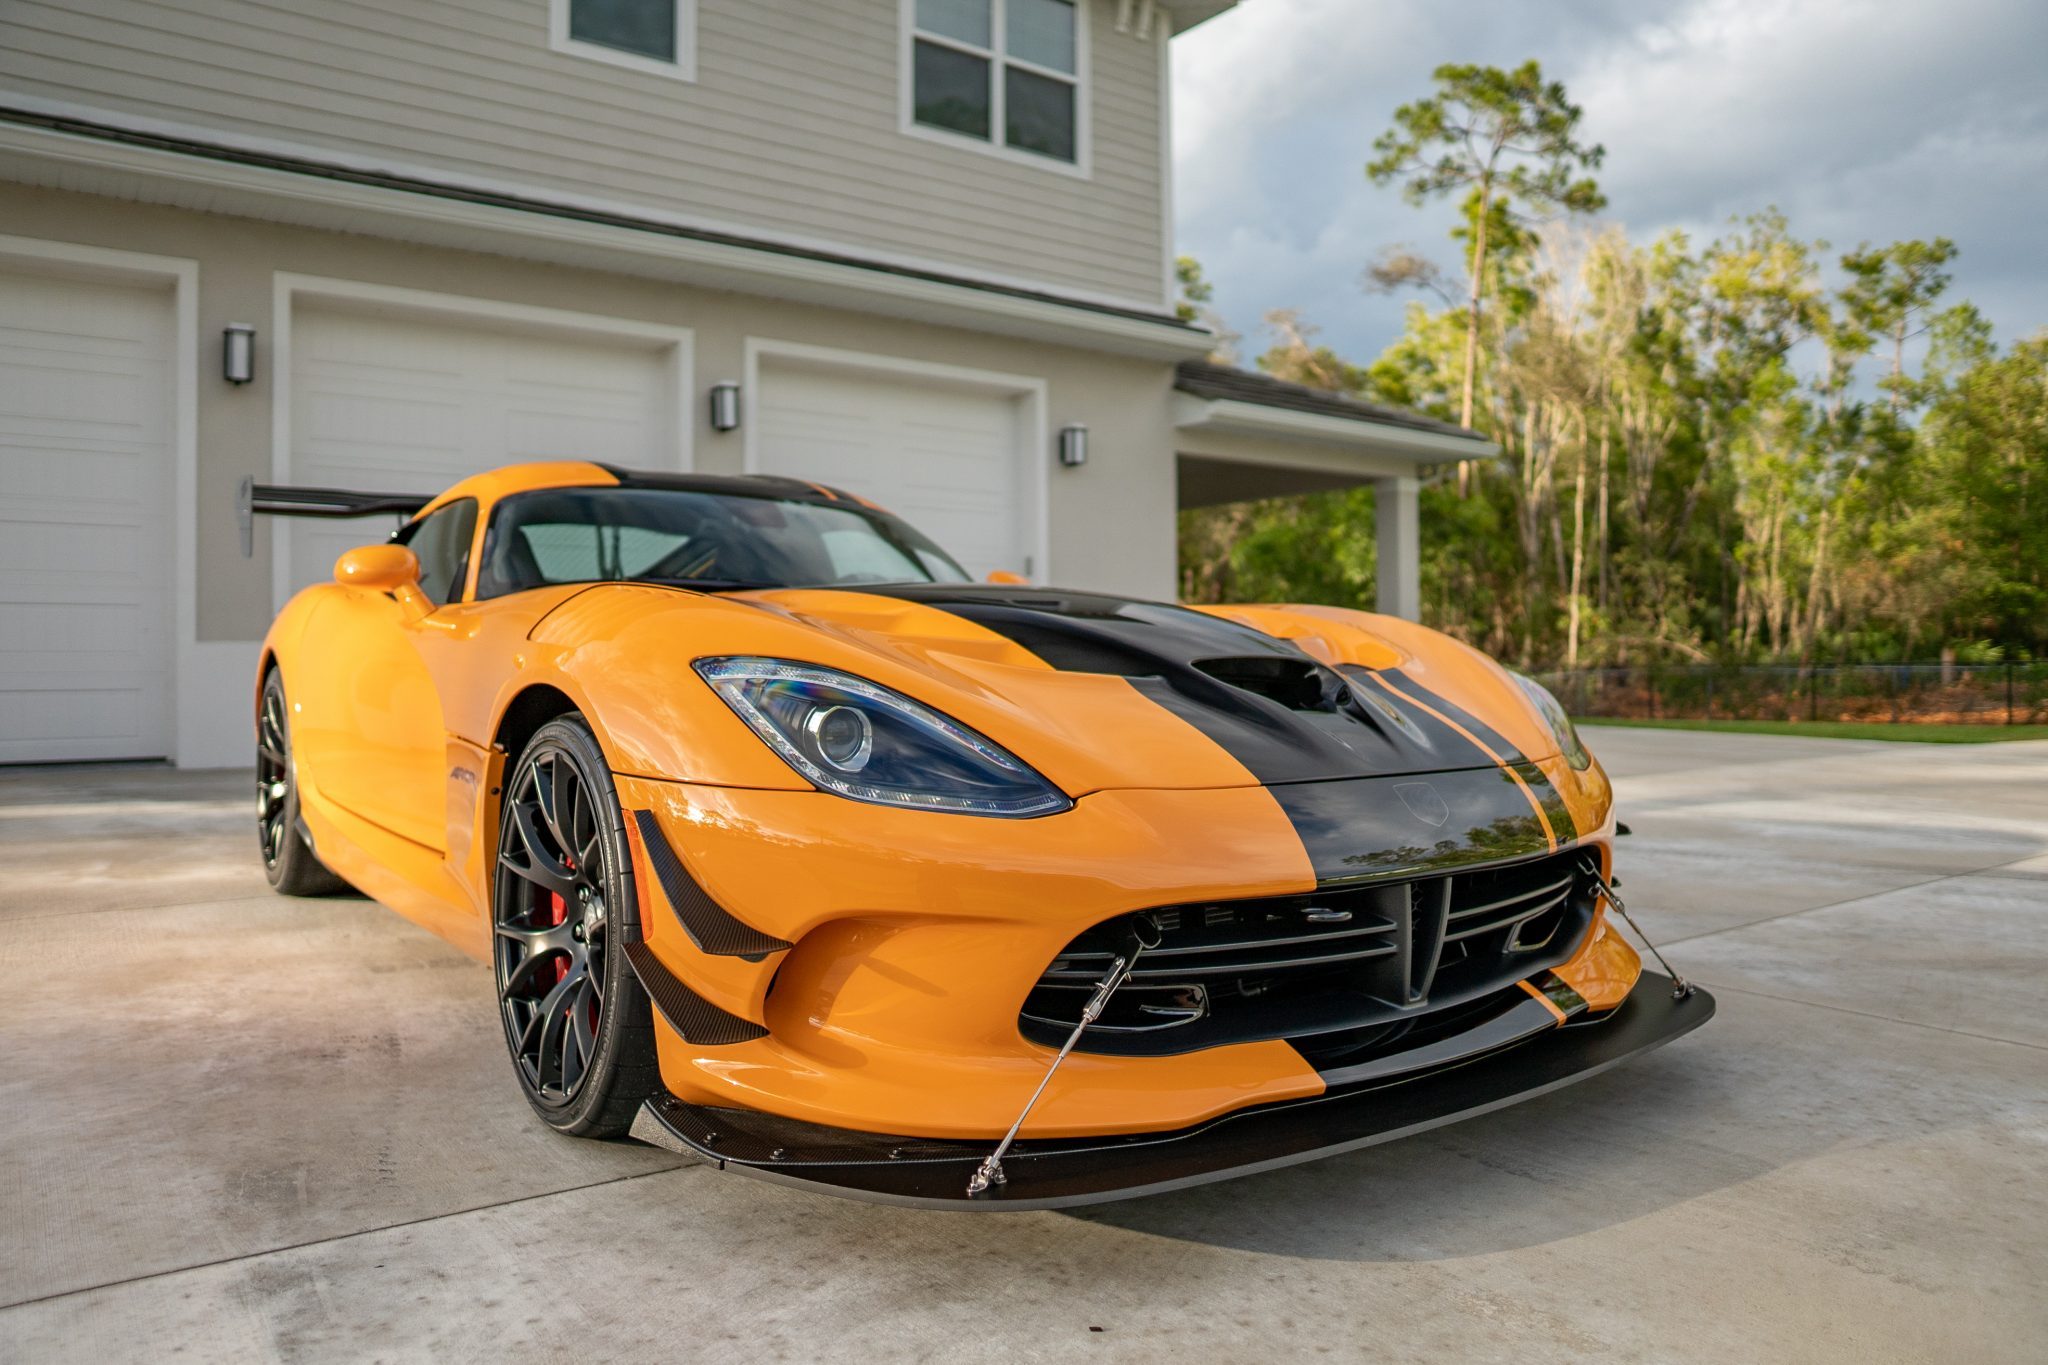 Dominate Your Local Track Day With This 17 Dodge Viper Acr Extreme Carscoops